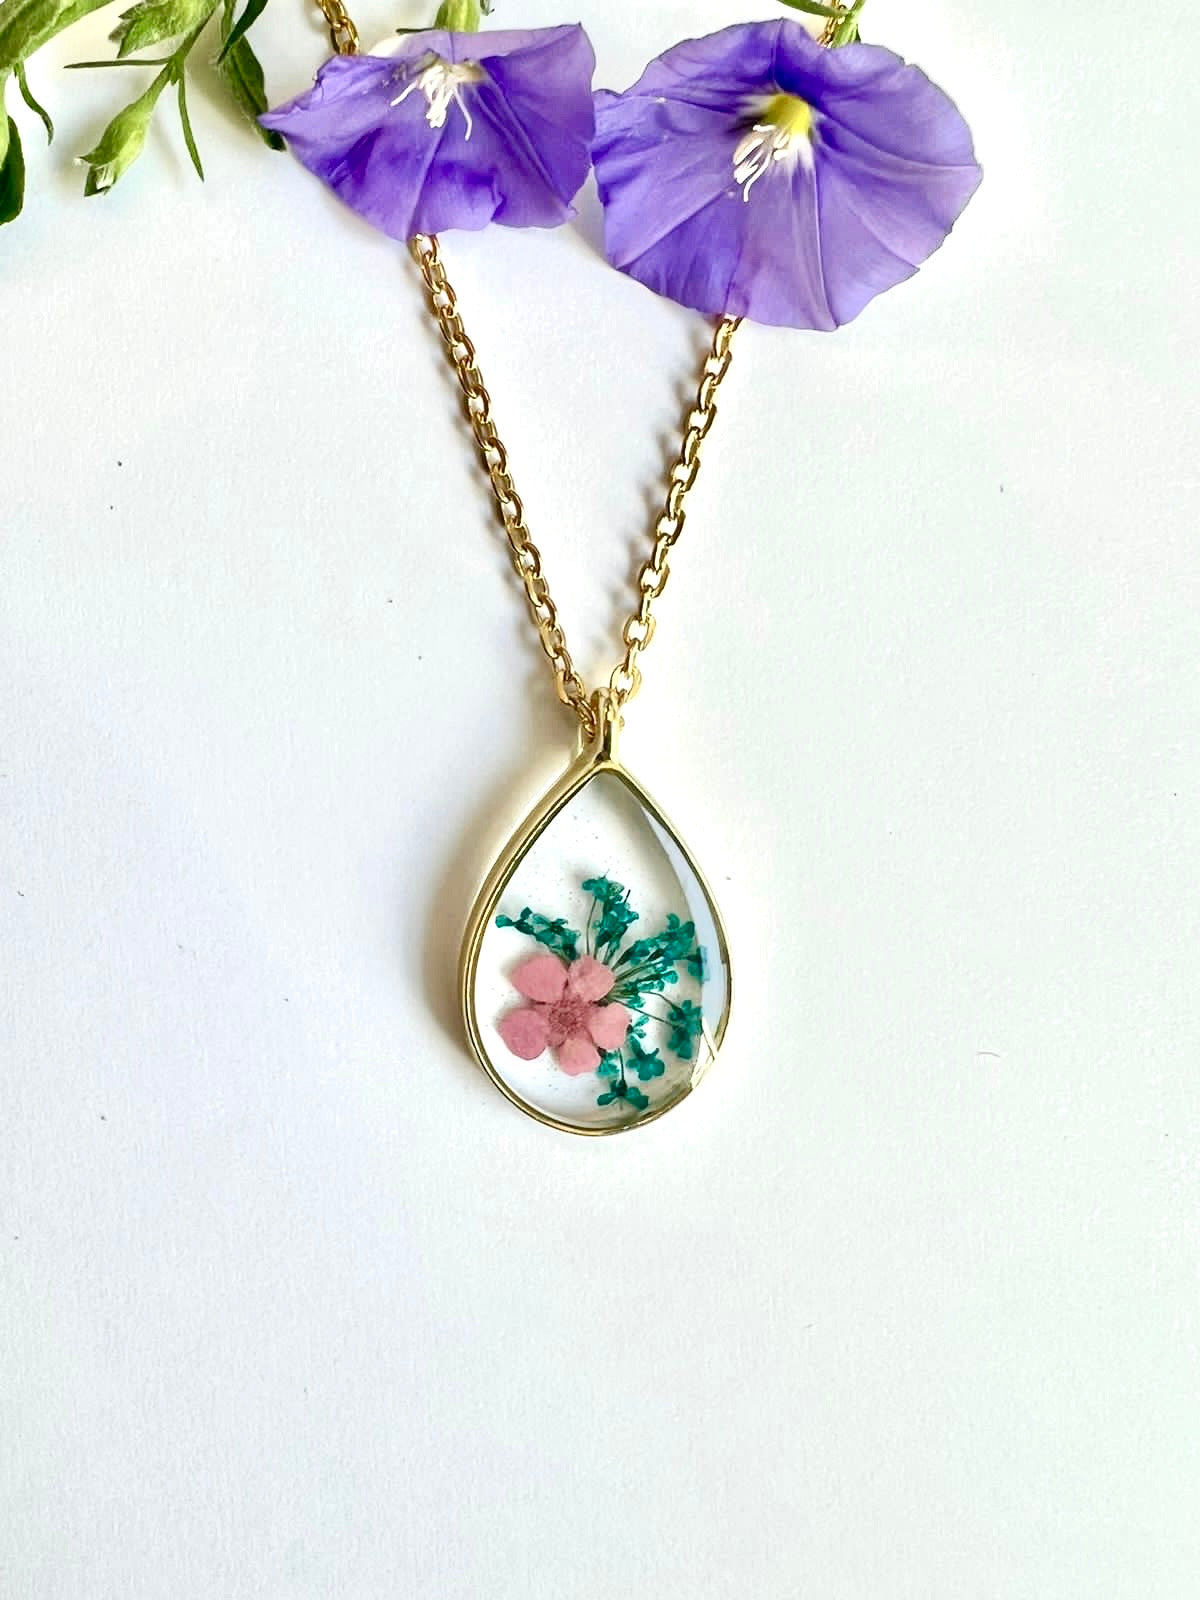 tear drop gold frame with tiny real blue and pink flowers necklace gift birthday anniversary